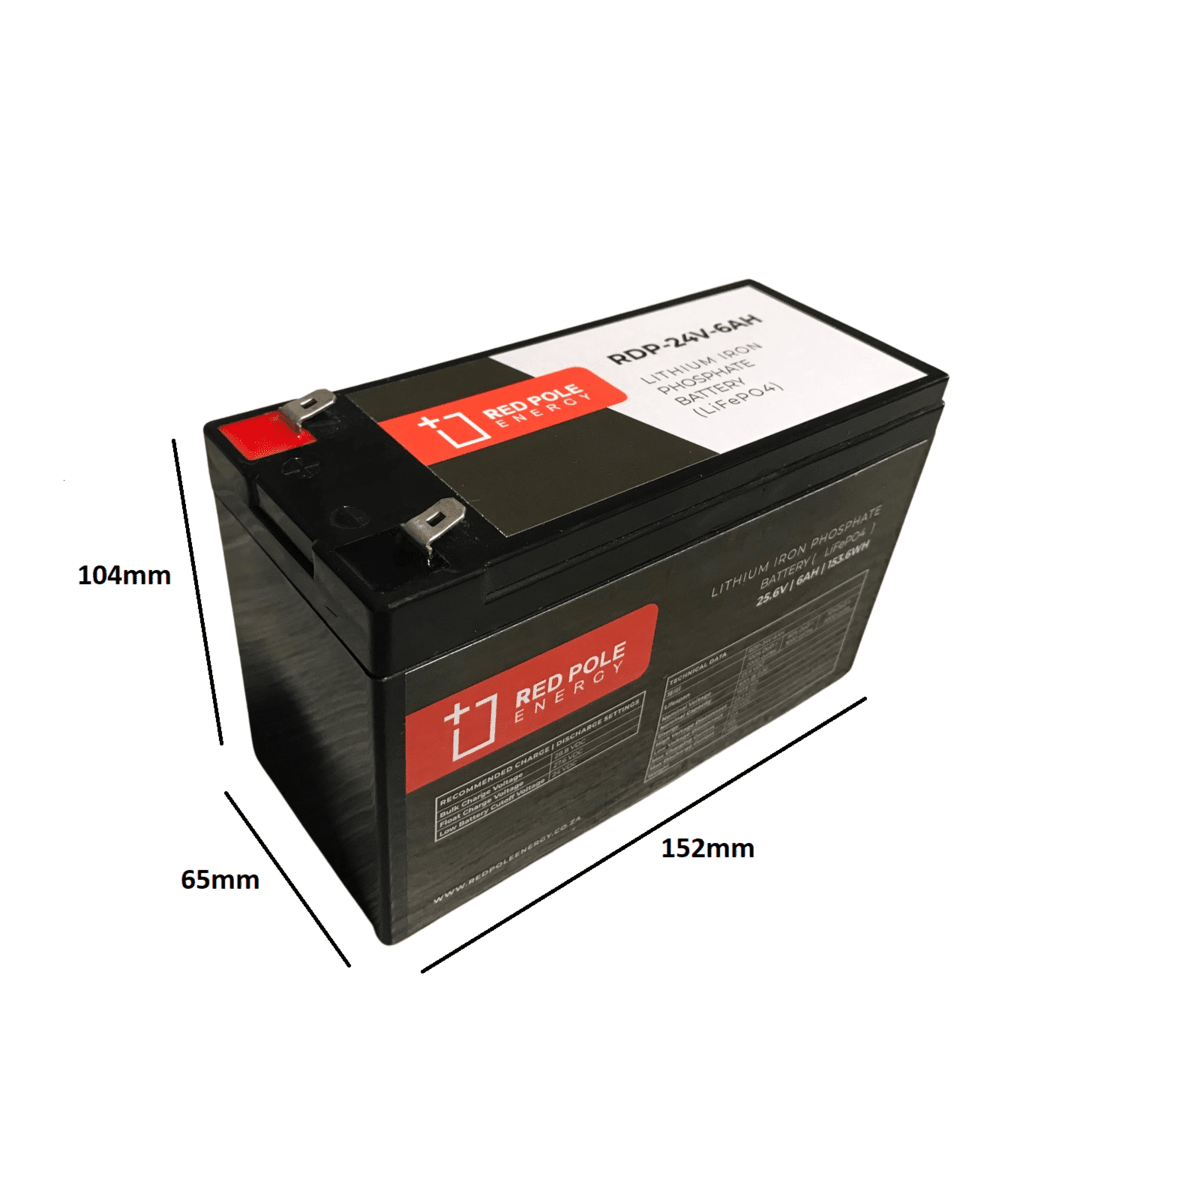 Red Pole Energy 24V 6Ah 153Wh LiFePO4 Battery